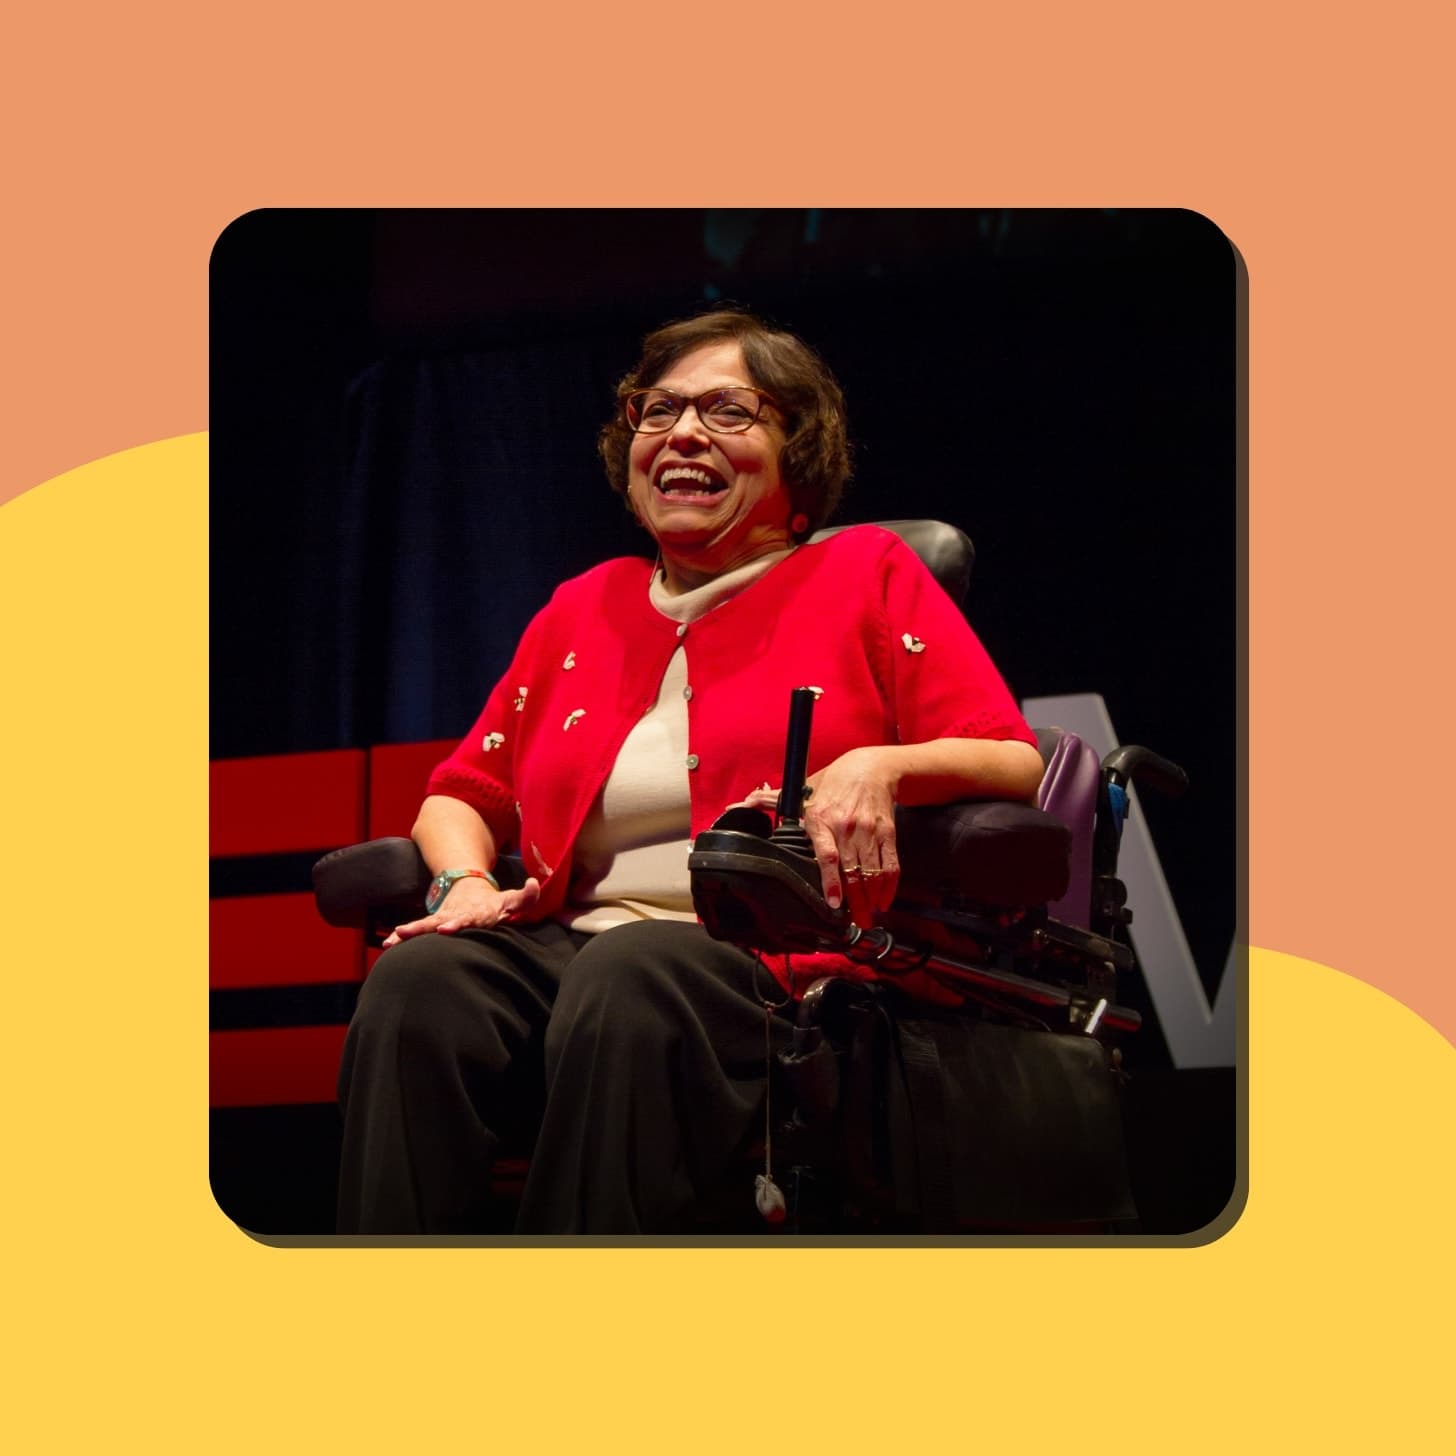 An older white woman with a beaming smile and cute glasses wears a red sweater and sits in a wheelchair on stage at a TED conference